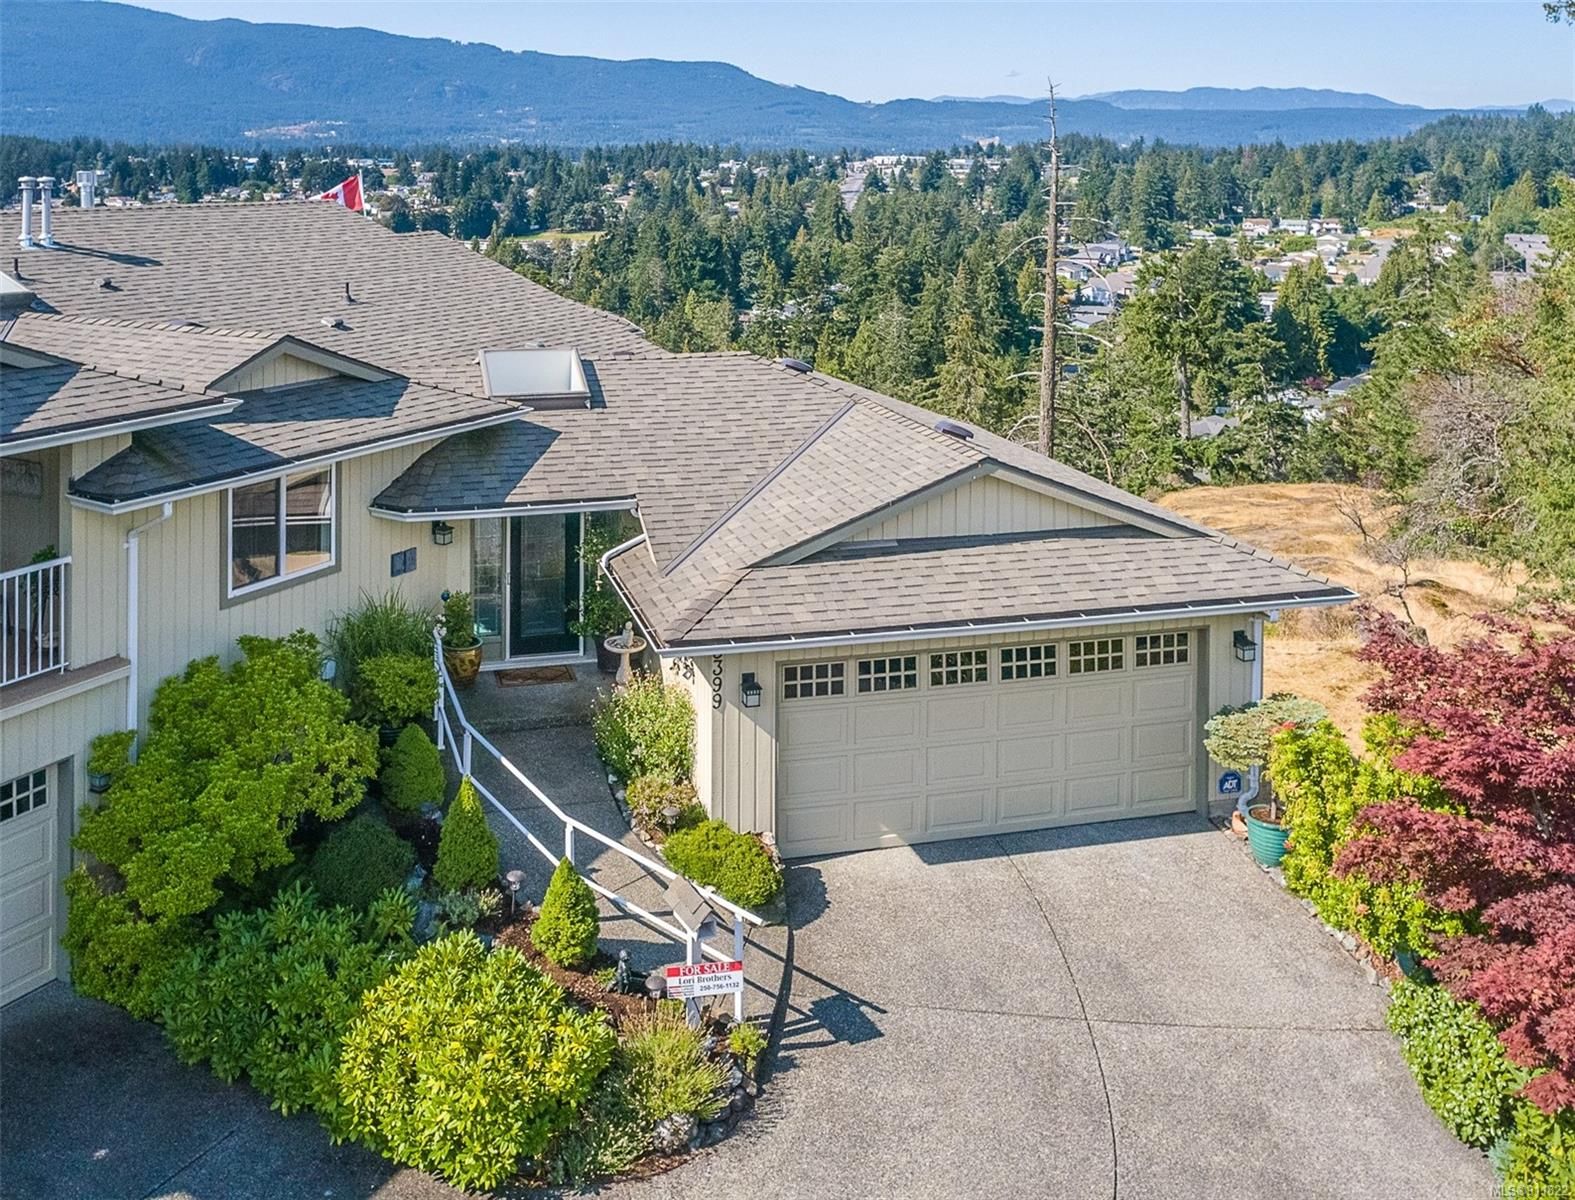 I have sold a property at 3399 Edgewood Dr in Nanaimo
